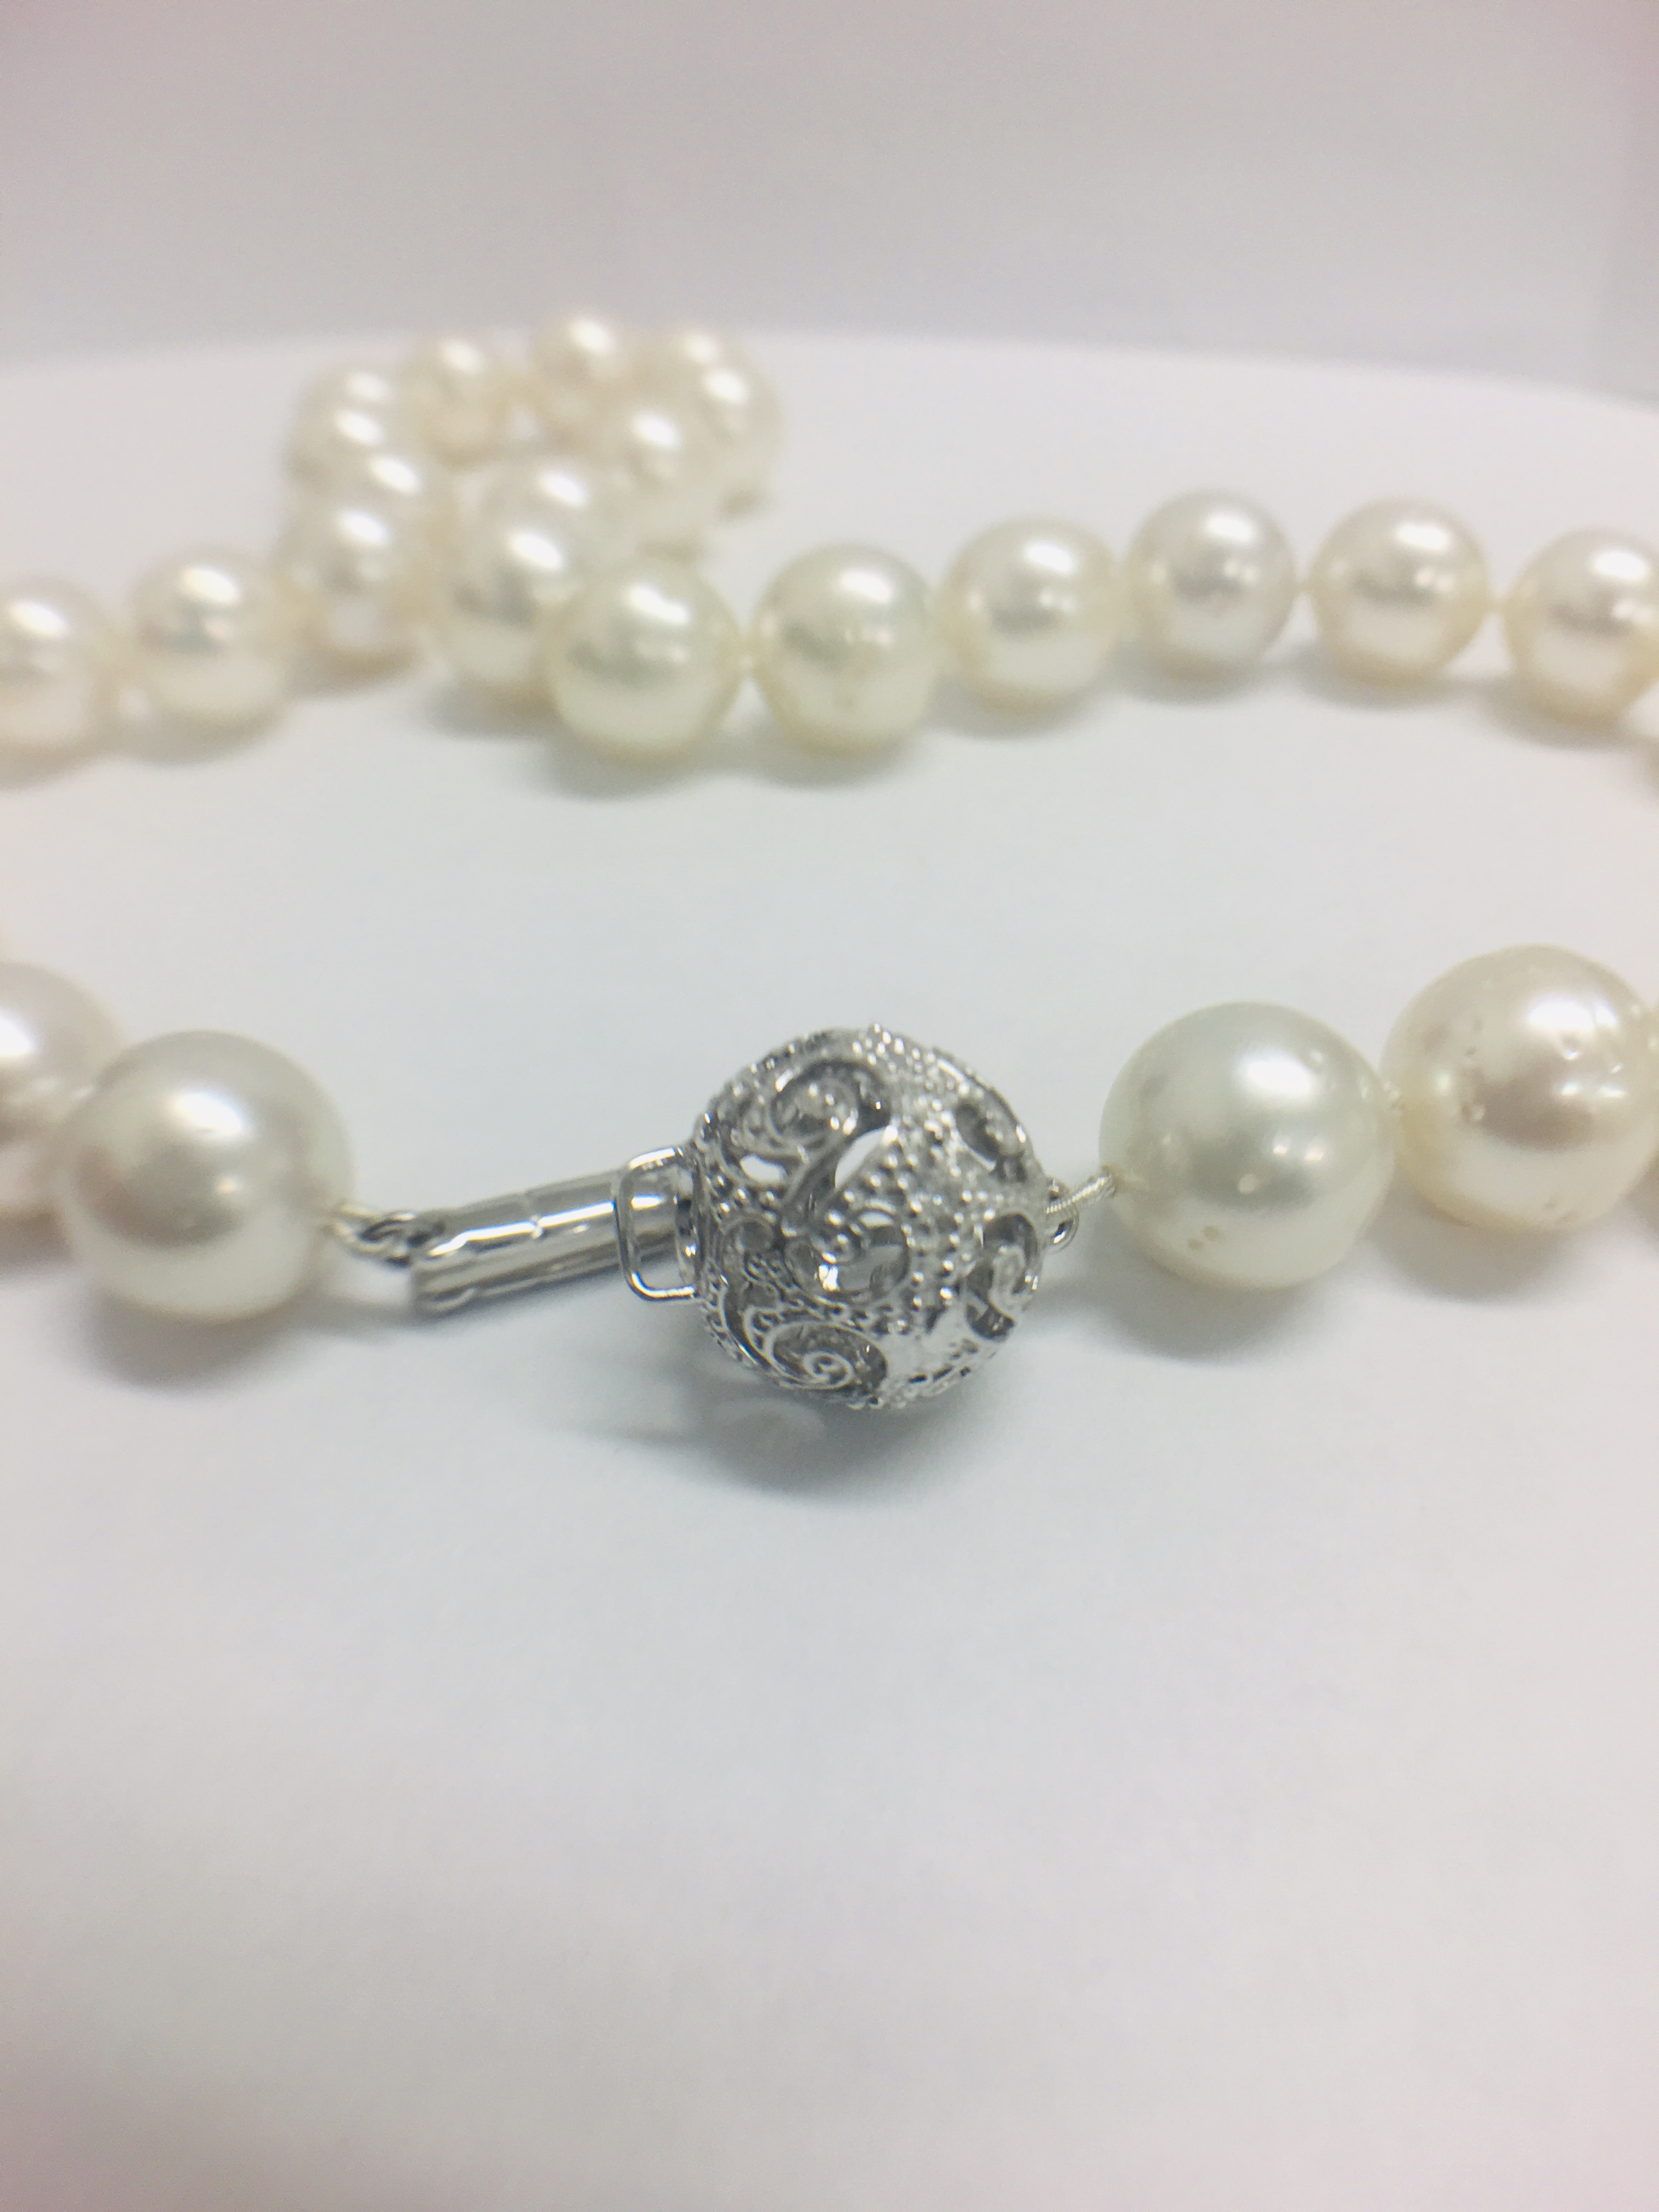 Strand 35 South Sea Pearls With 14Ct White Gold Filagree Style Ball Clasp.